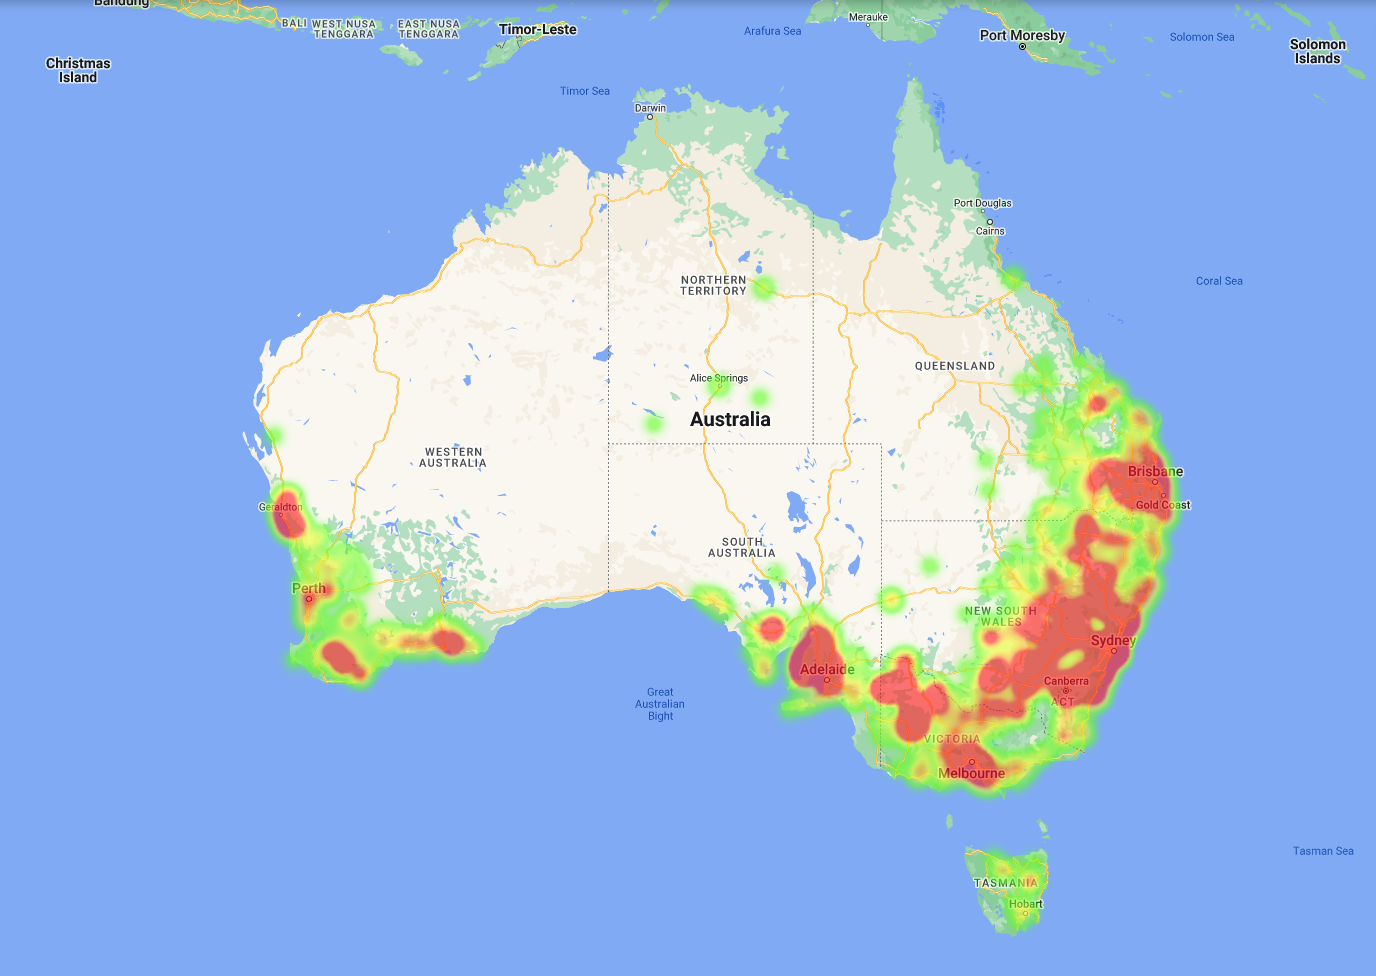 Heat map of Australia for rat and rodent sightings